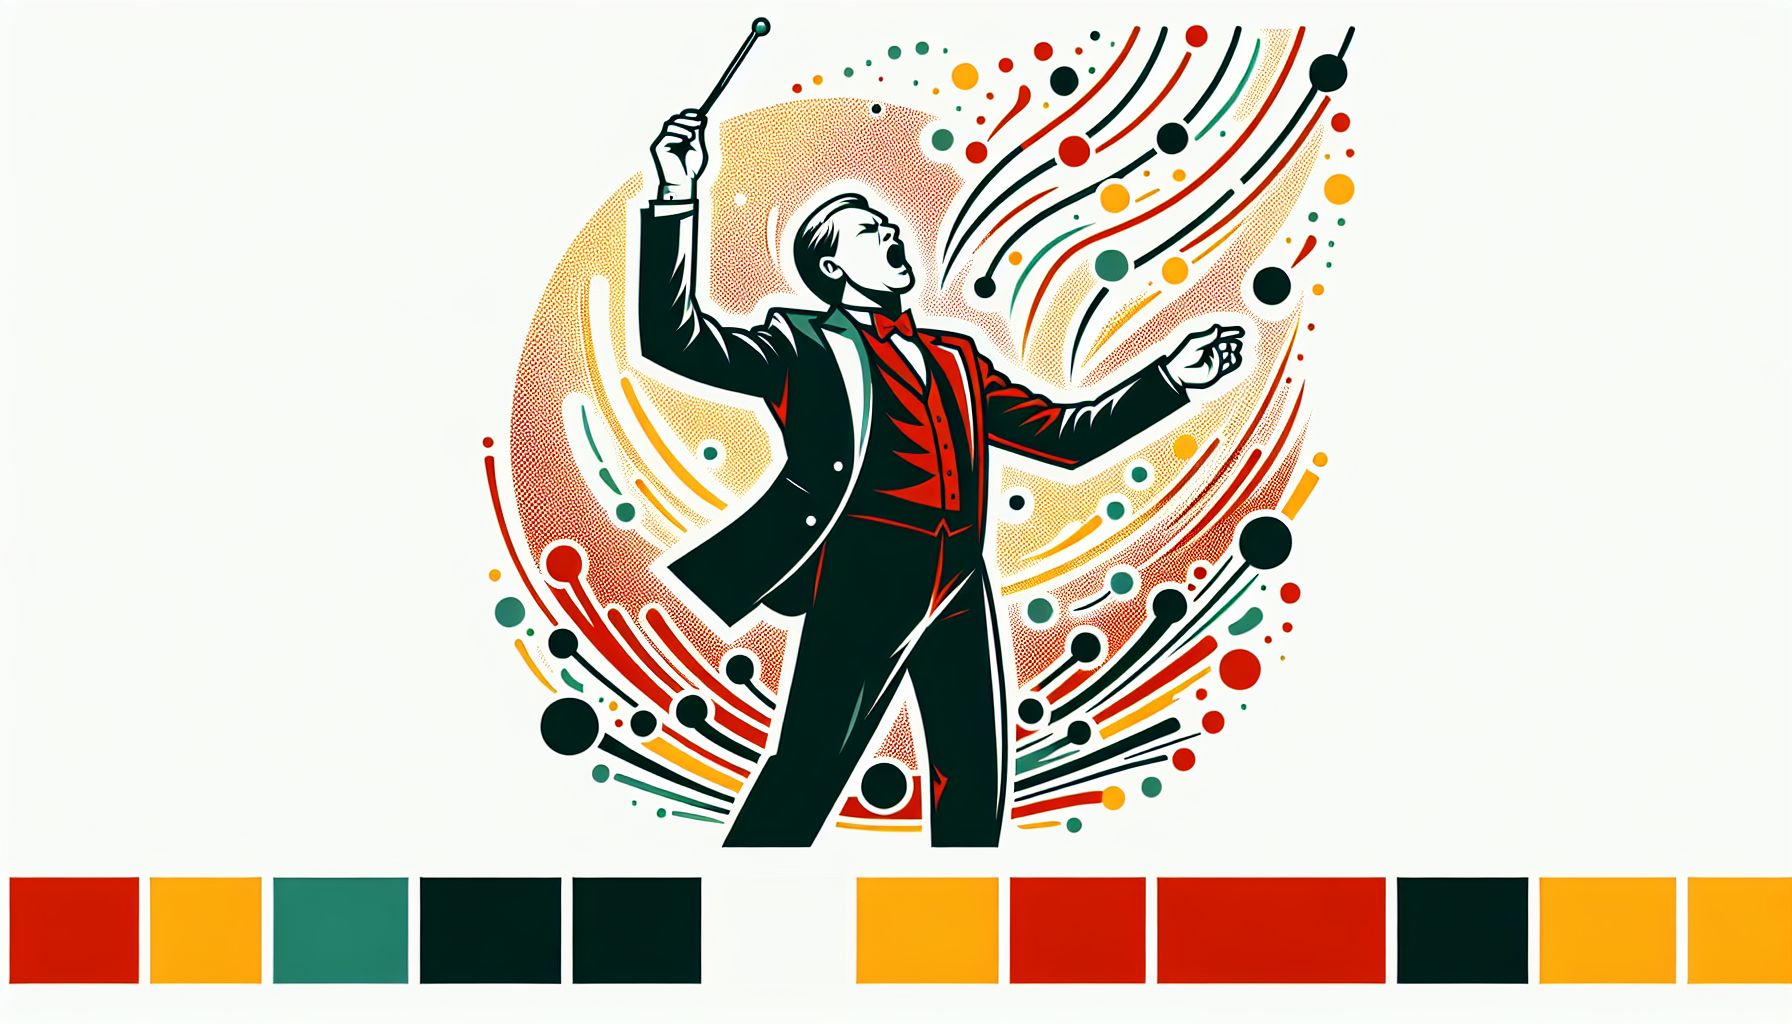 Conductor in flat illustration style and white background, red #f47574, green #88c7a8, yellow #fcc44b, and blue #645bc8 colors.